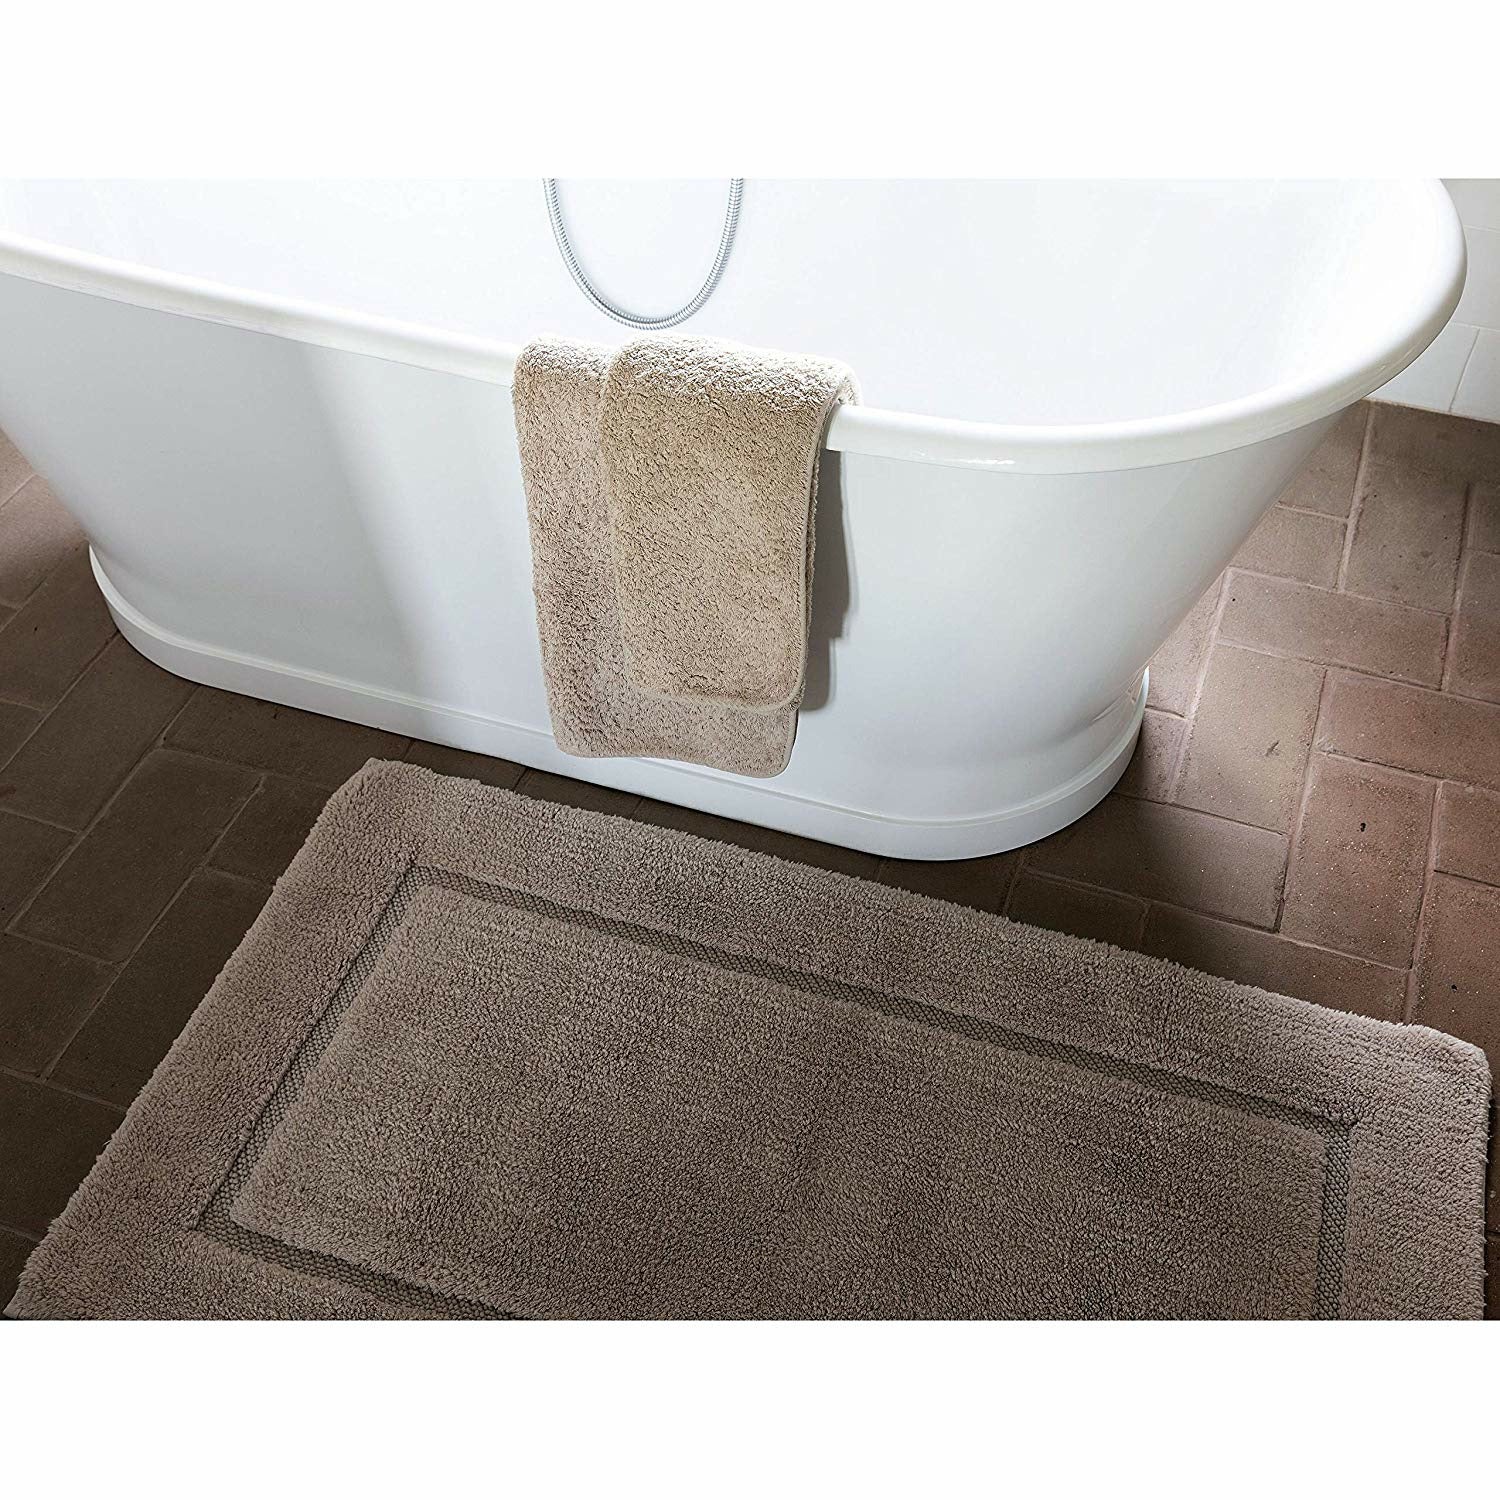 Alyssa Taupe Bath Mat, 17x24, Natural, Sold by at Home